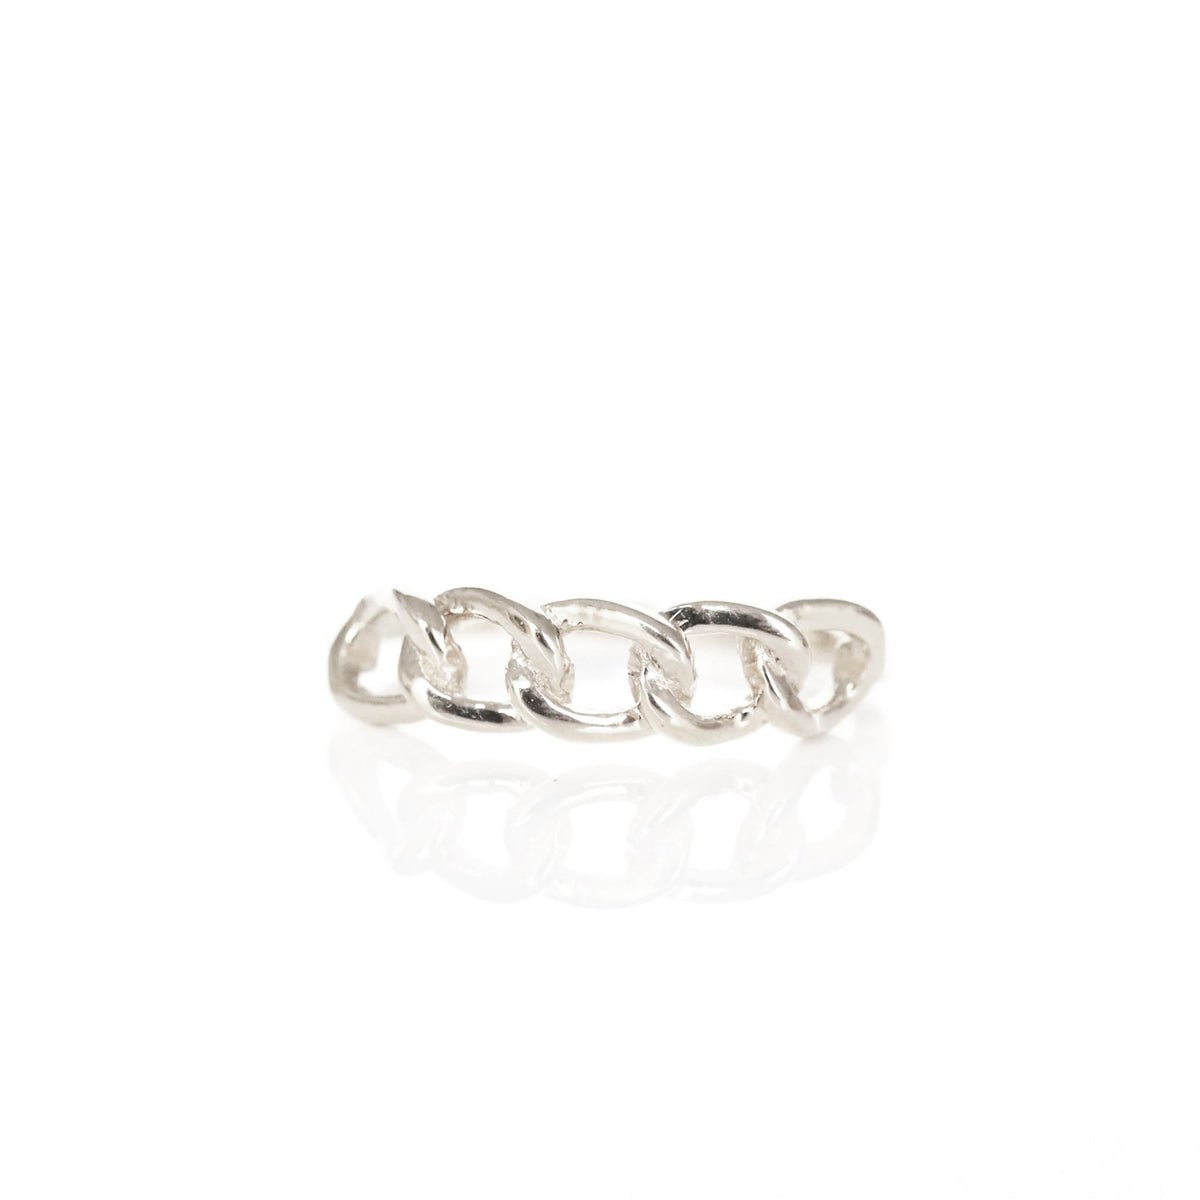 FEARLESS CABLE LINK RING - SILVER - SO PRETTY CARA COTTER